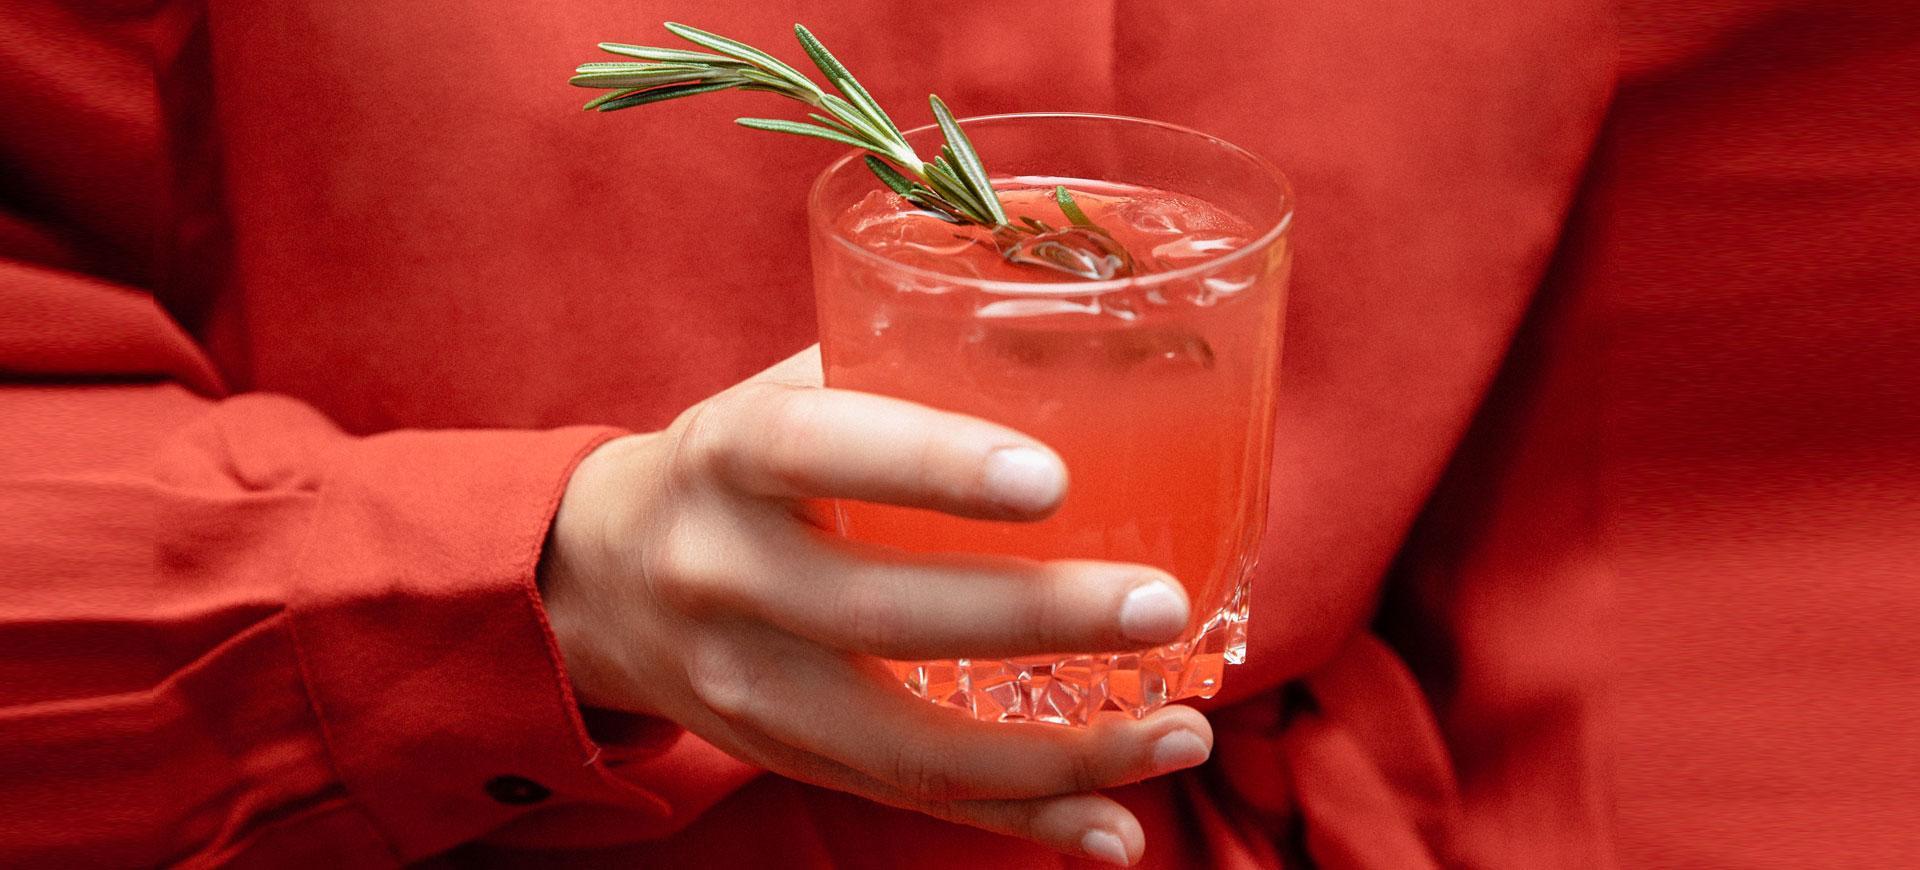 Legend of an iconic cocktail: the Negroni